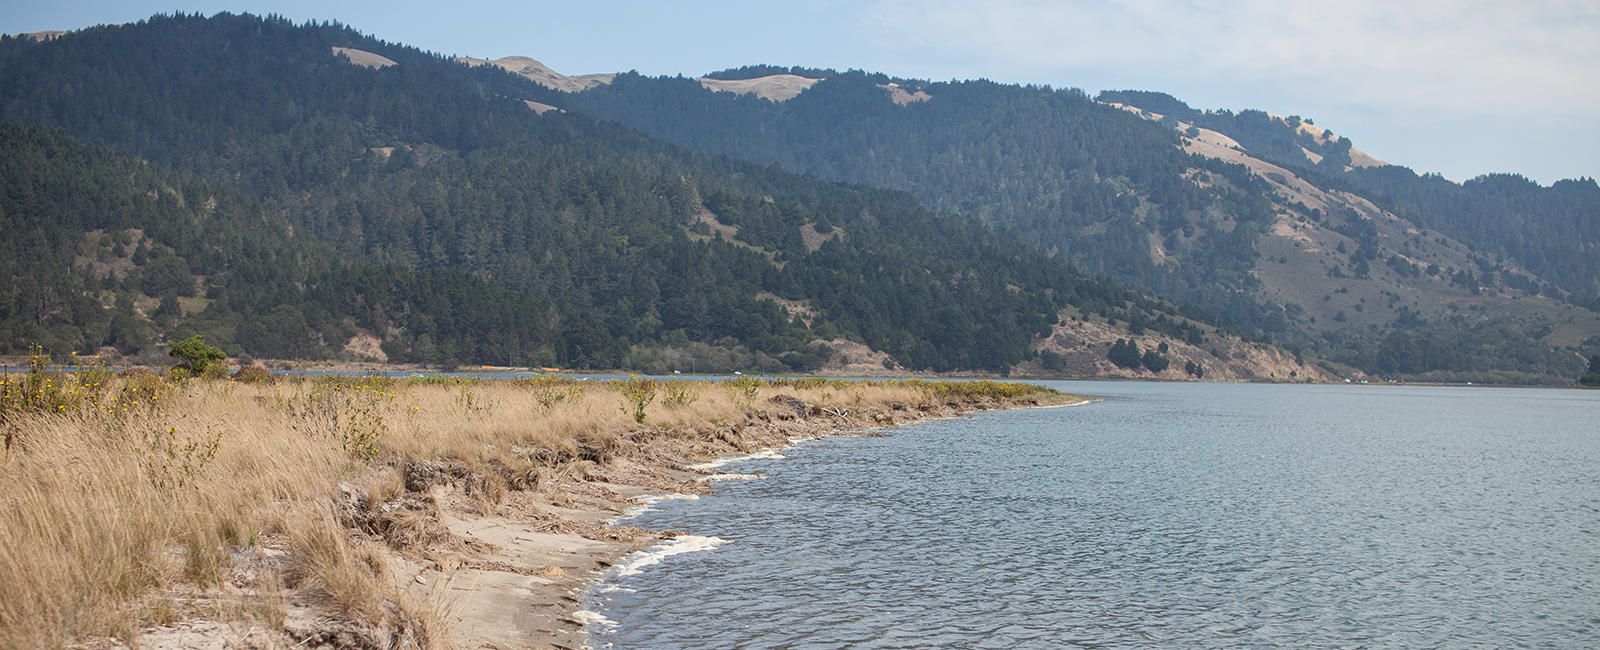 Bolinas Lagoon is host to a wide variety of wildlife.